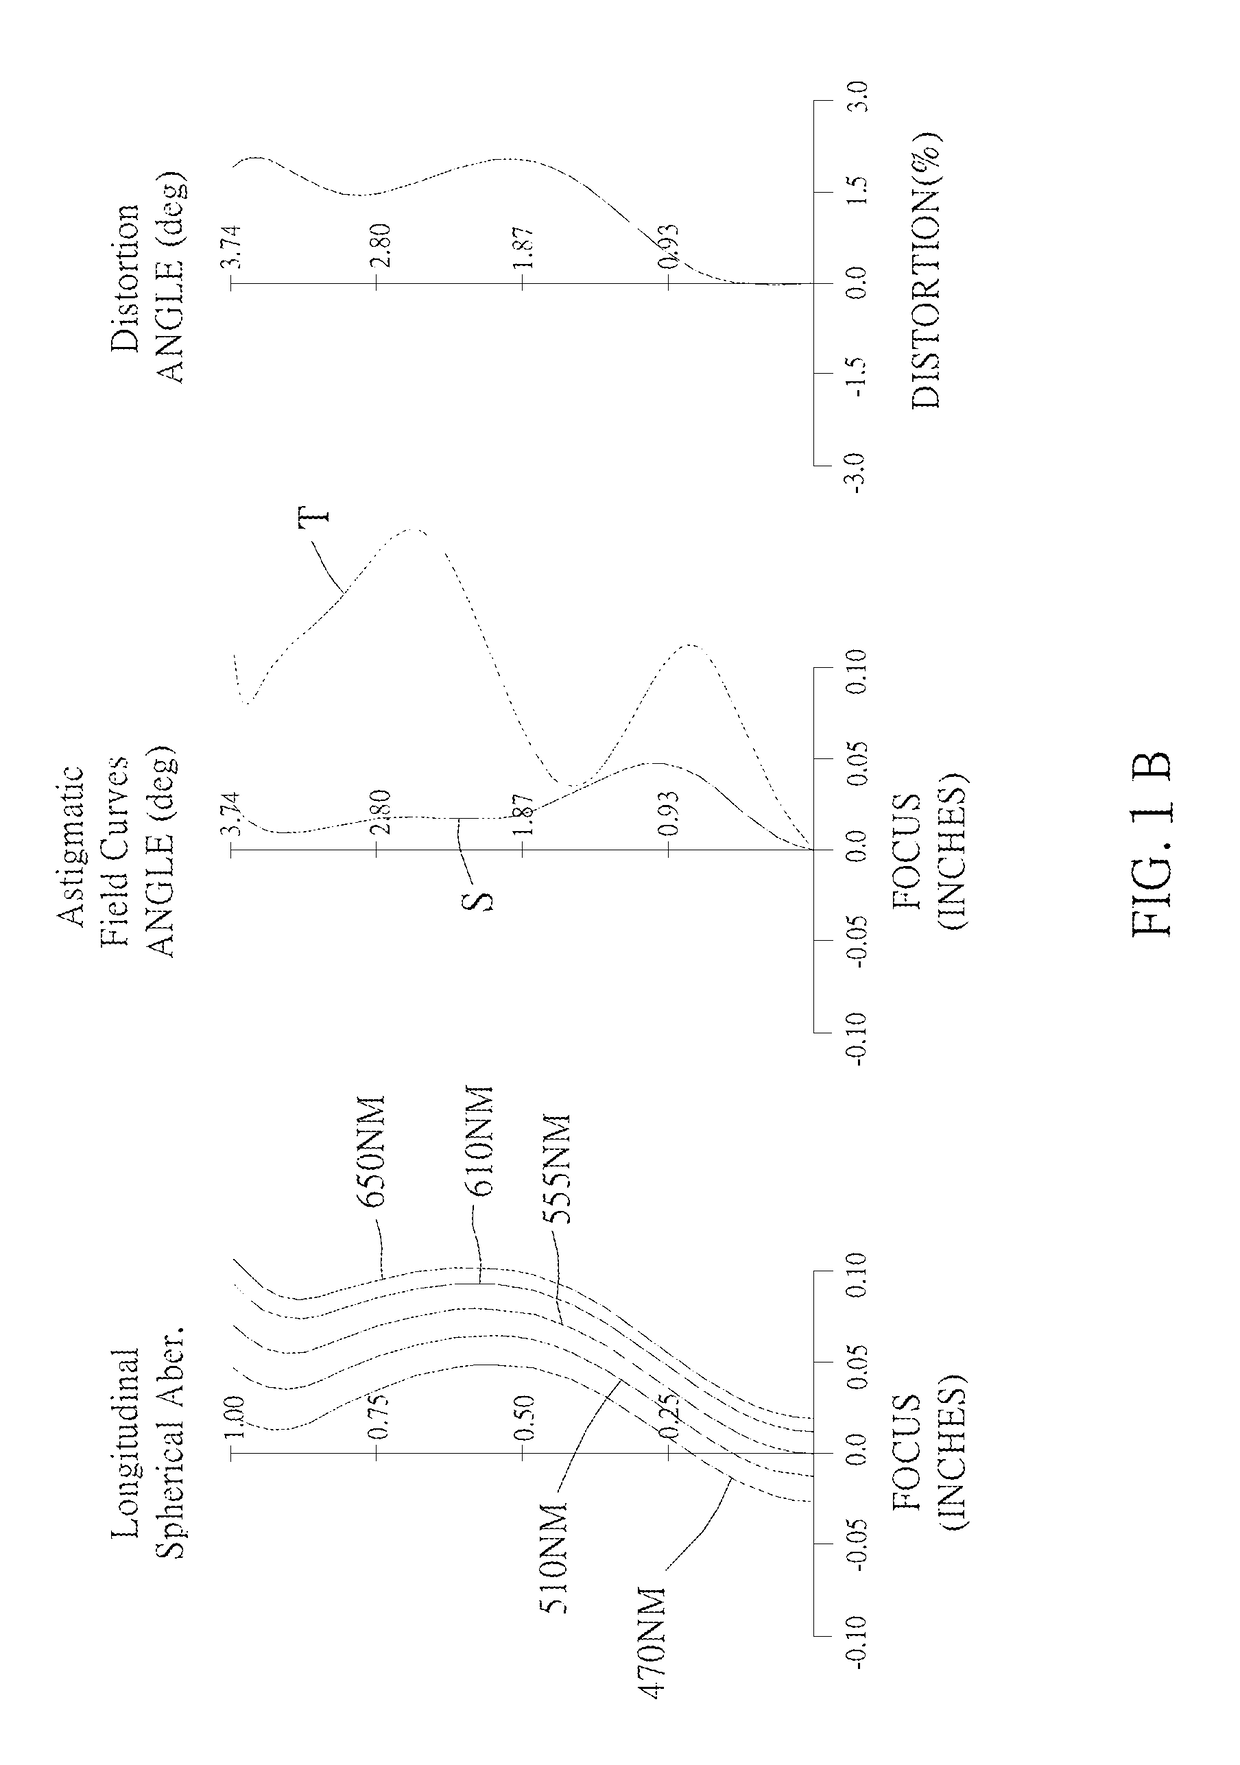 Optical image capturing system for electronic device